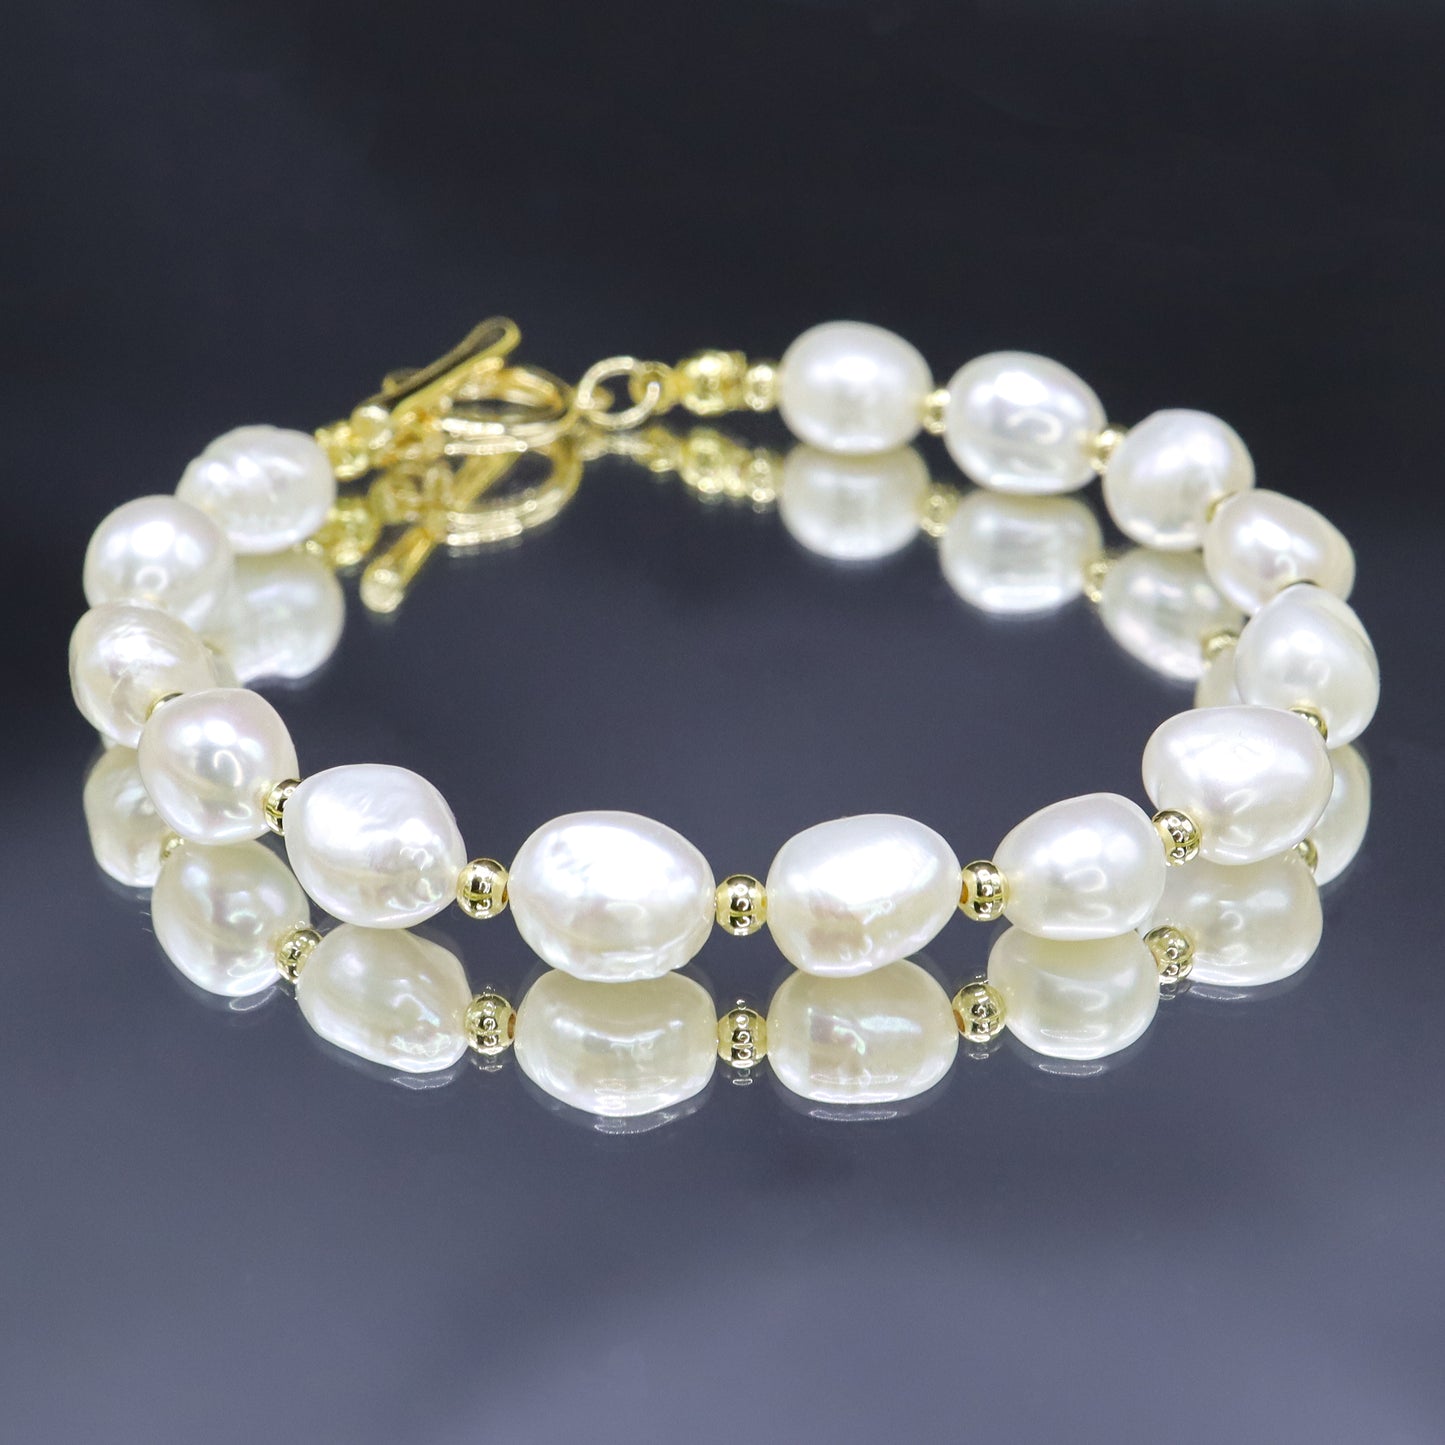 Blanche - Baroque Freshwater Pearl Bracelet with OT Buckle